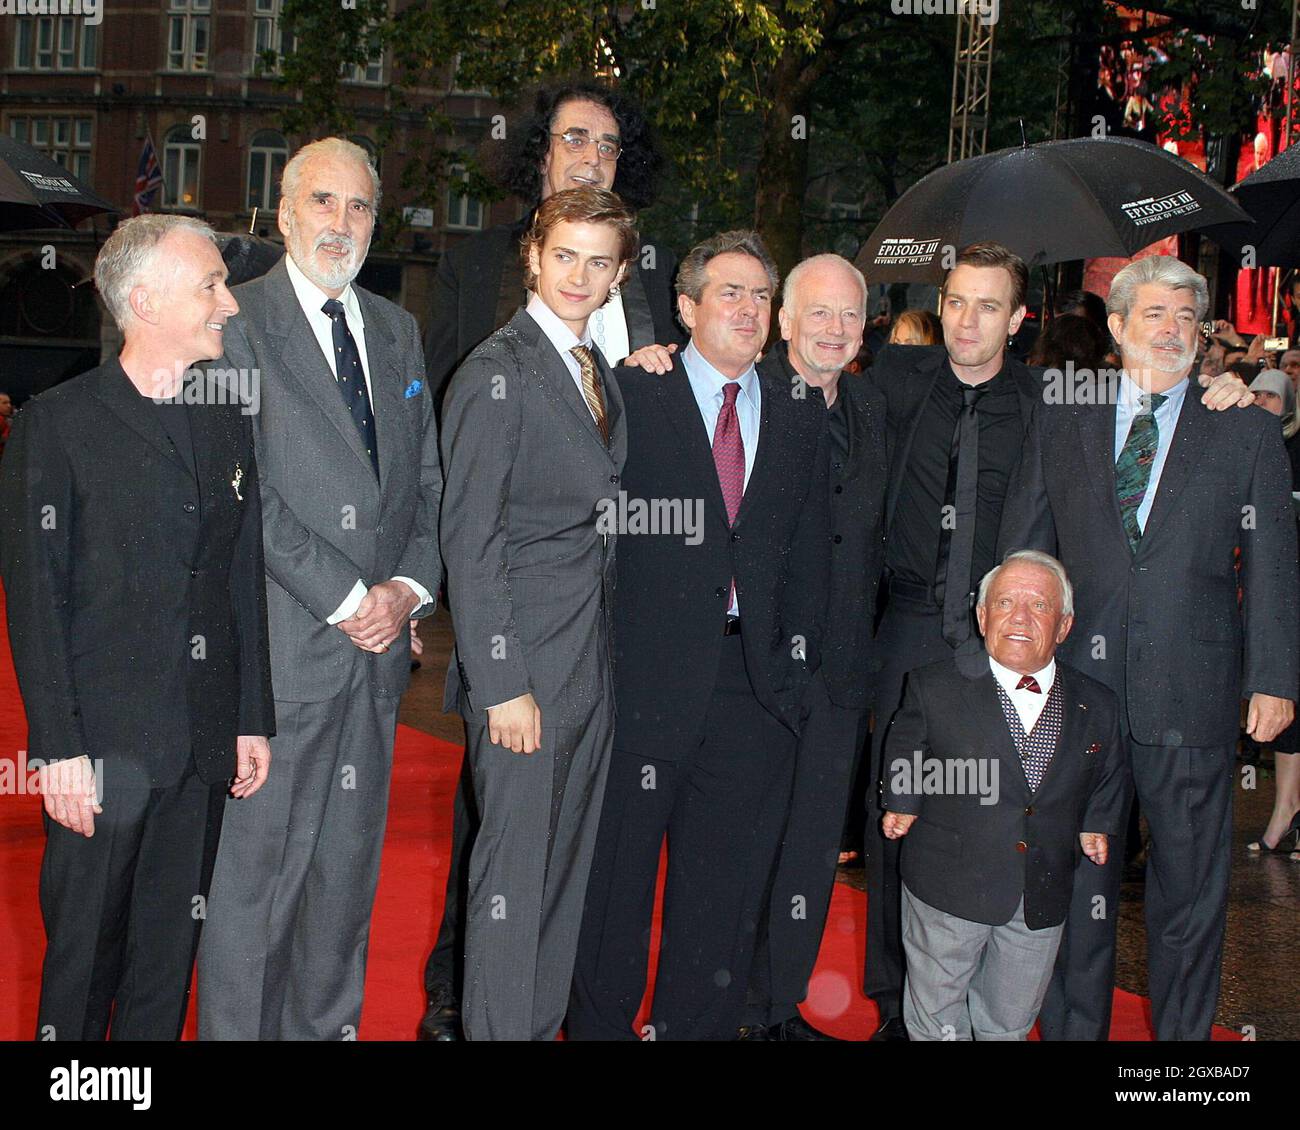 Christopher Lee, Hayden Christensen, Ian McDiarmid, Anthony Daniels,  Ewan McGregor, George Lucas, Peter Mayhew and Kenny Baker pictured outside the Odeon Leicester Square  in London where the UK premier of Star Wars: Episode II: Revenge of the Sith took place. Stock Photo